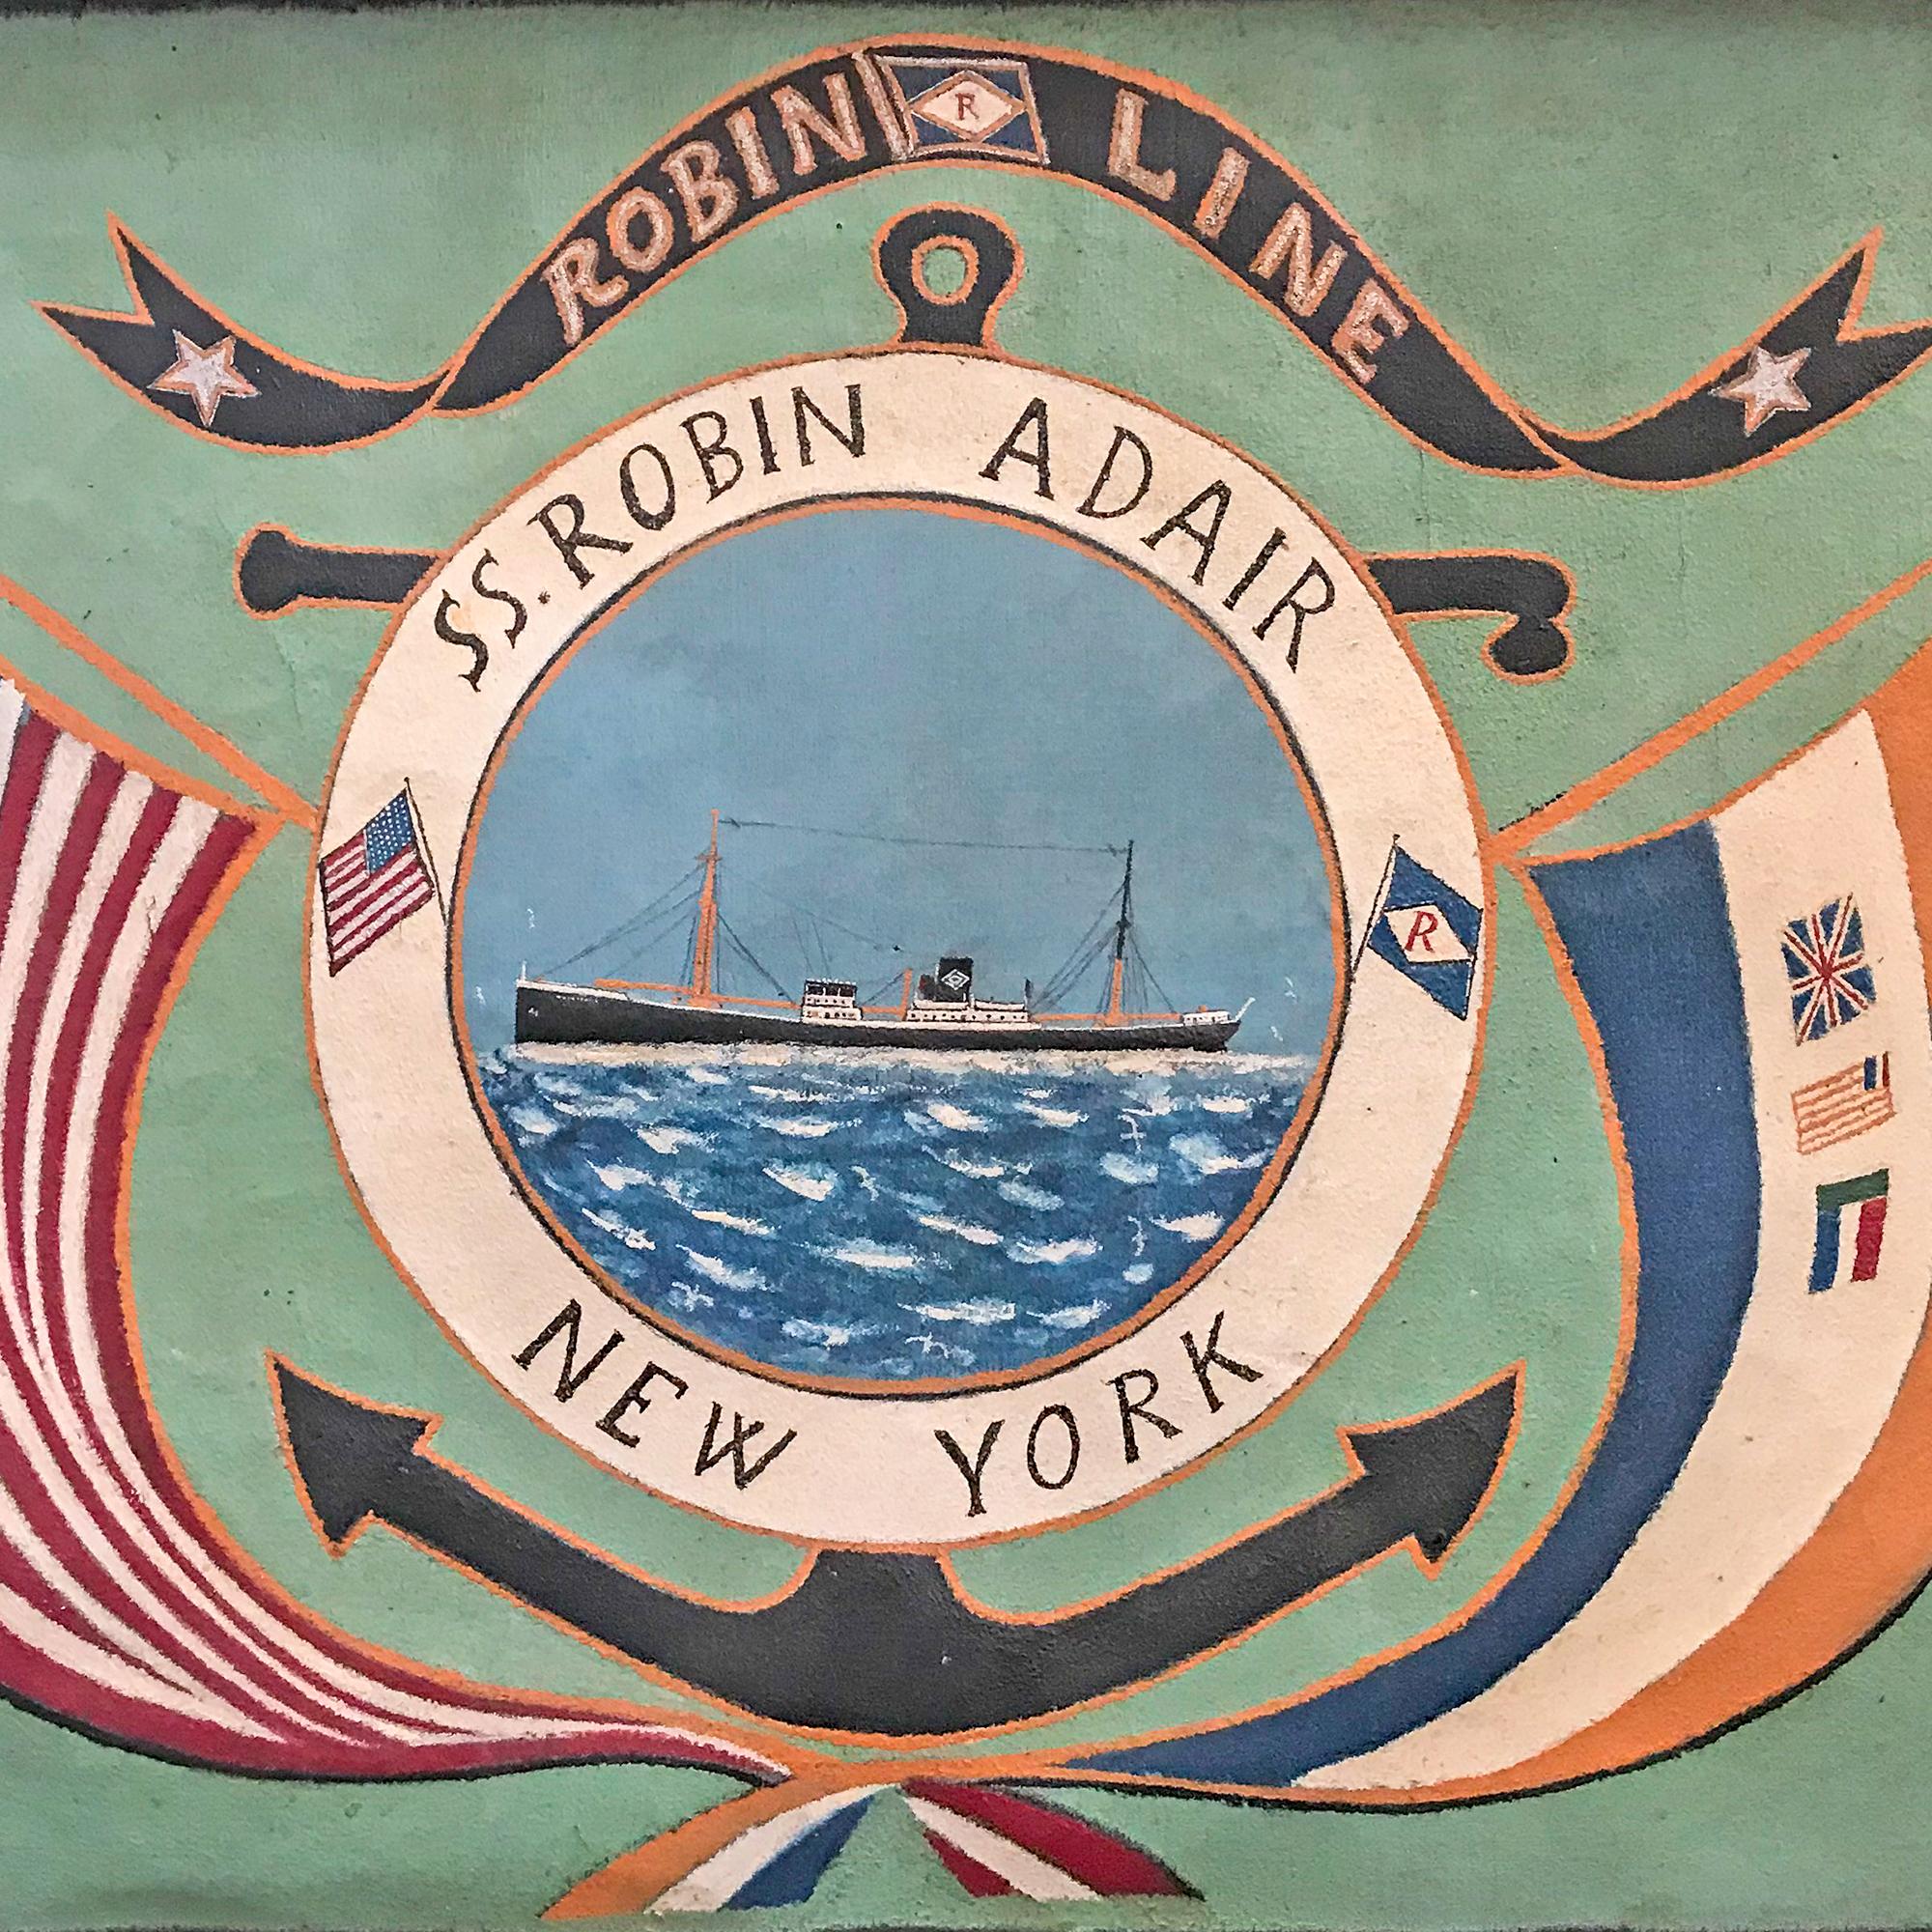 “S.S. Robin Adair” of the Robin Line
Depicting the ‘Robin Adair’ framed in a life
ring with anchor and streaming flags over
a green ground, circa 1920
Oil on canvas in a gold frame with a black liner

The Robin Line consisted of the Robin